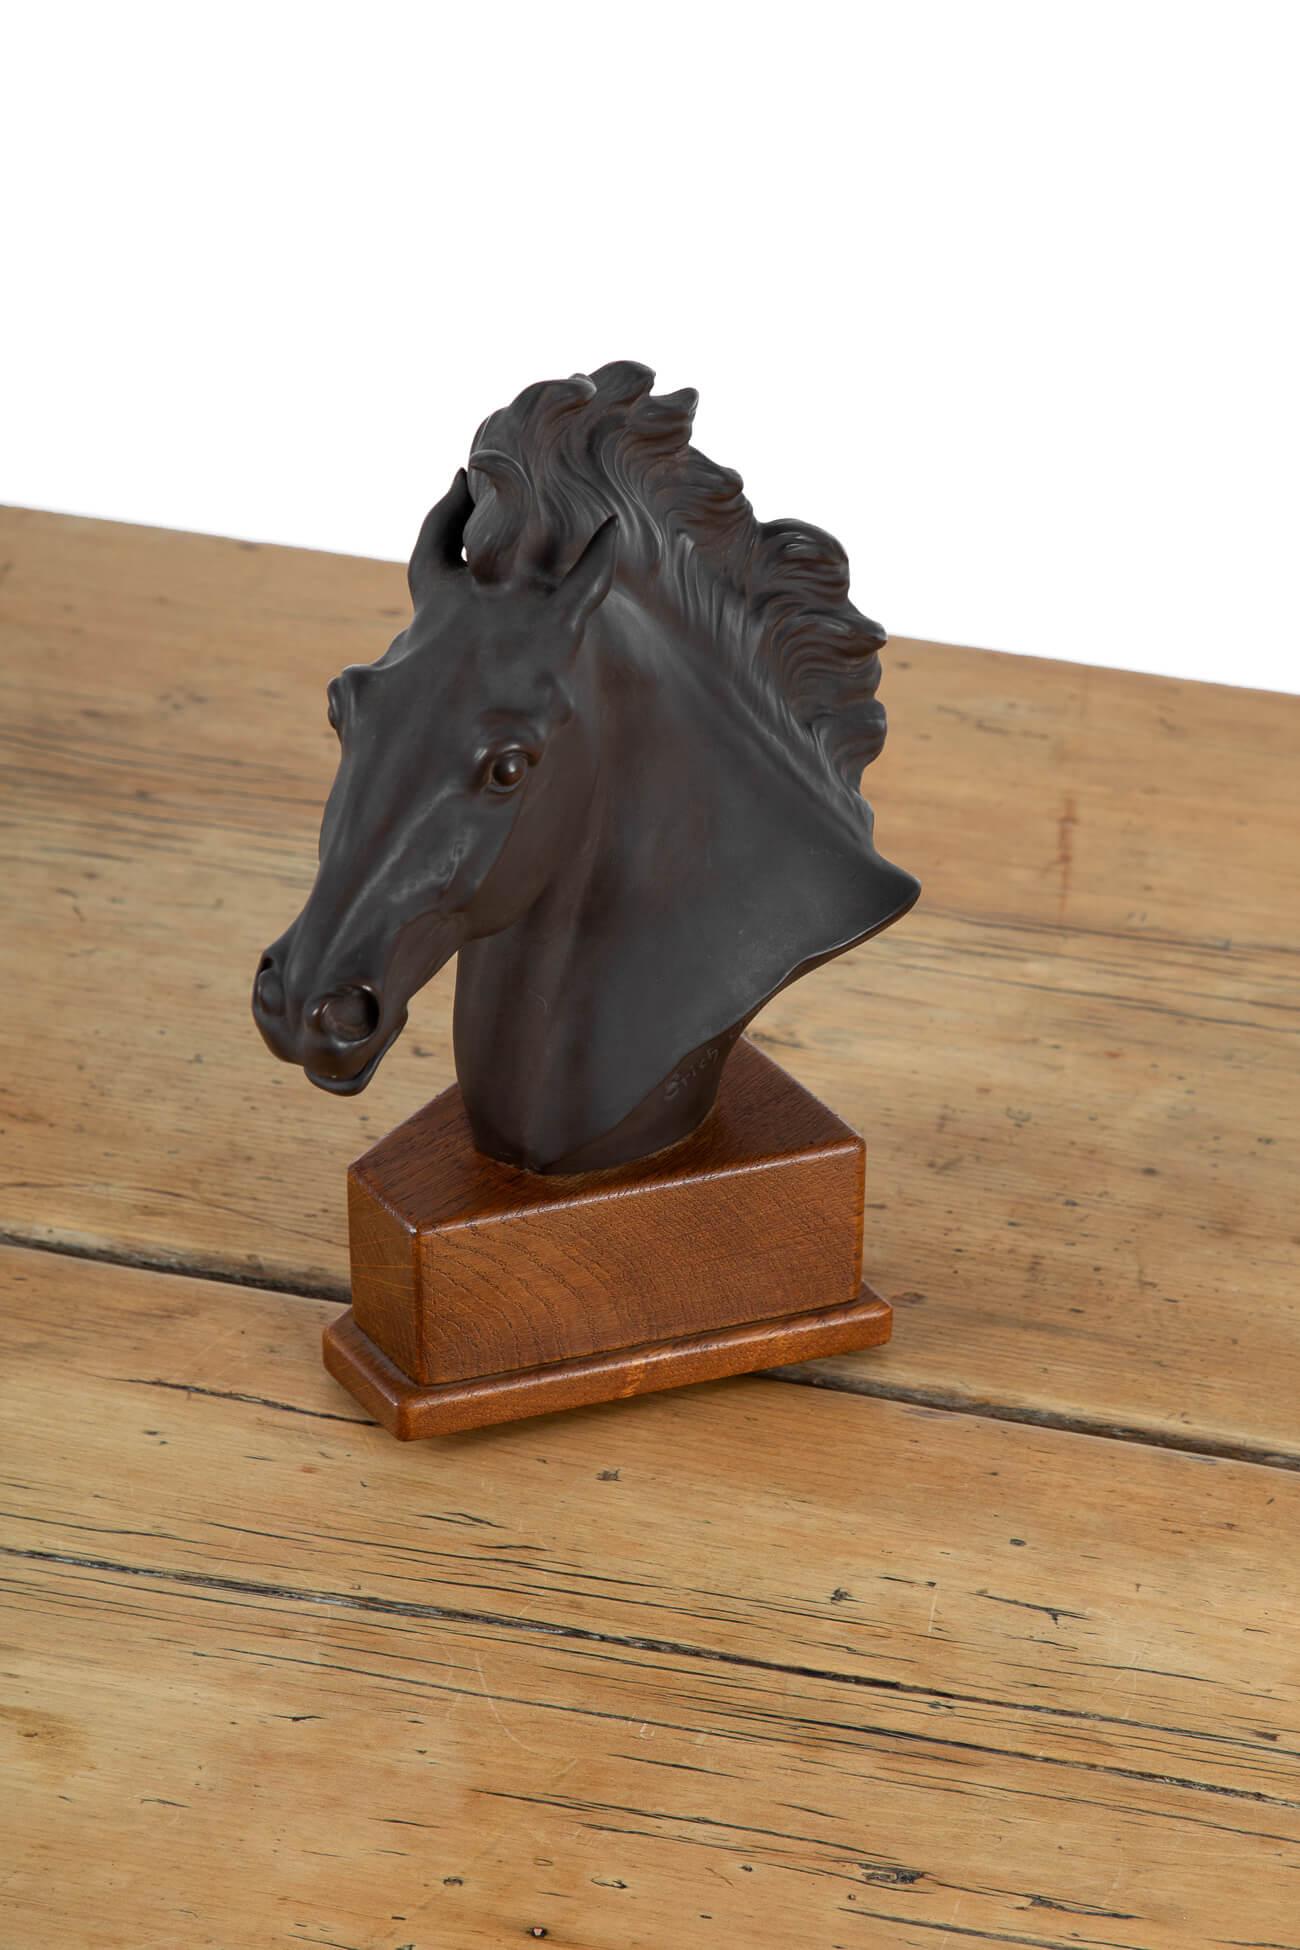 Mid-Century Modern Ceramic Horse Sculpture by Erich Oehme, 1949 For Sale